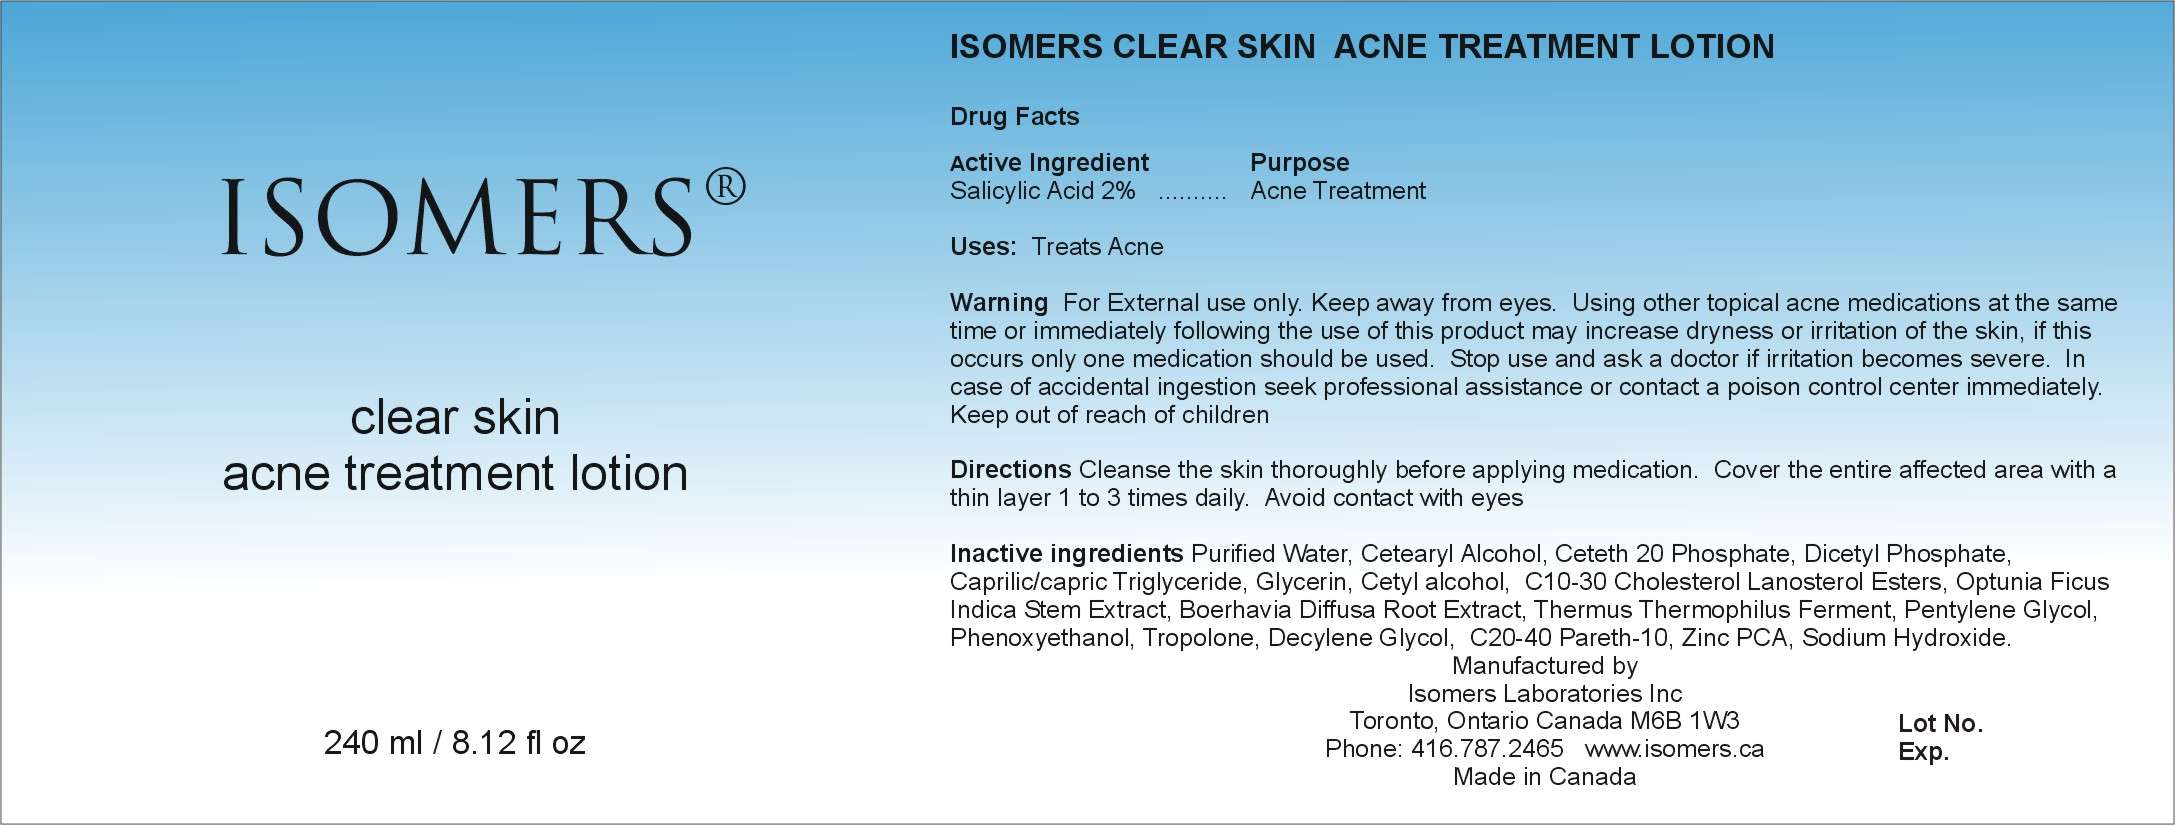 Isomers Clear Skin Acne Treatment Lotion